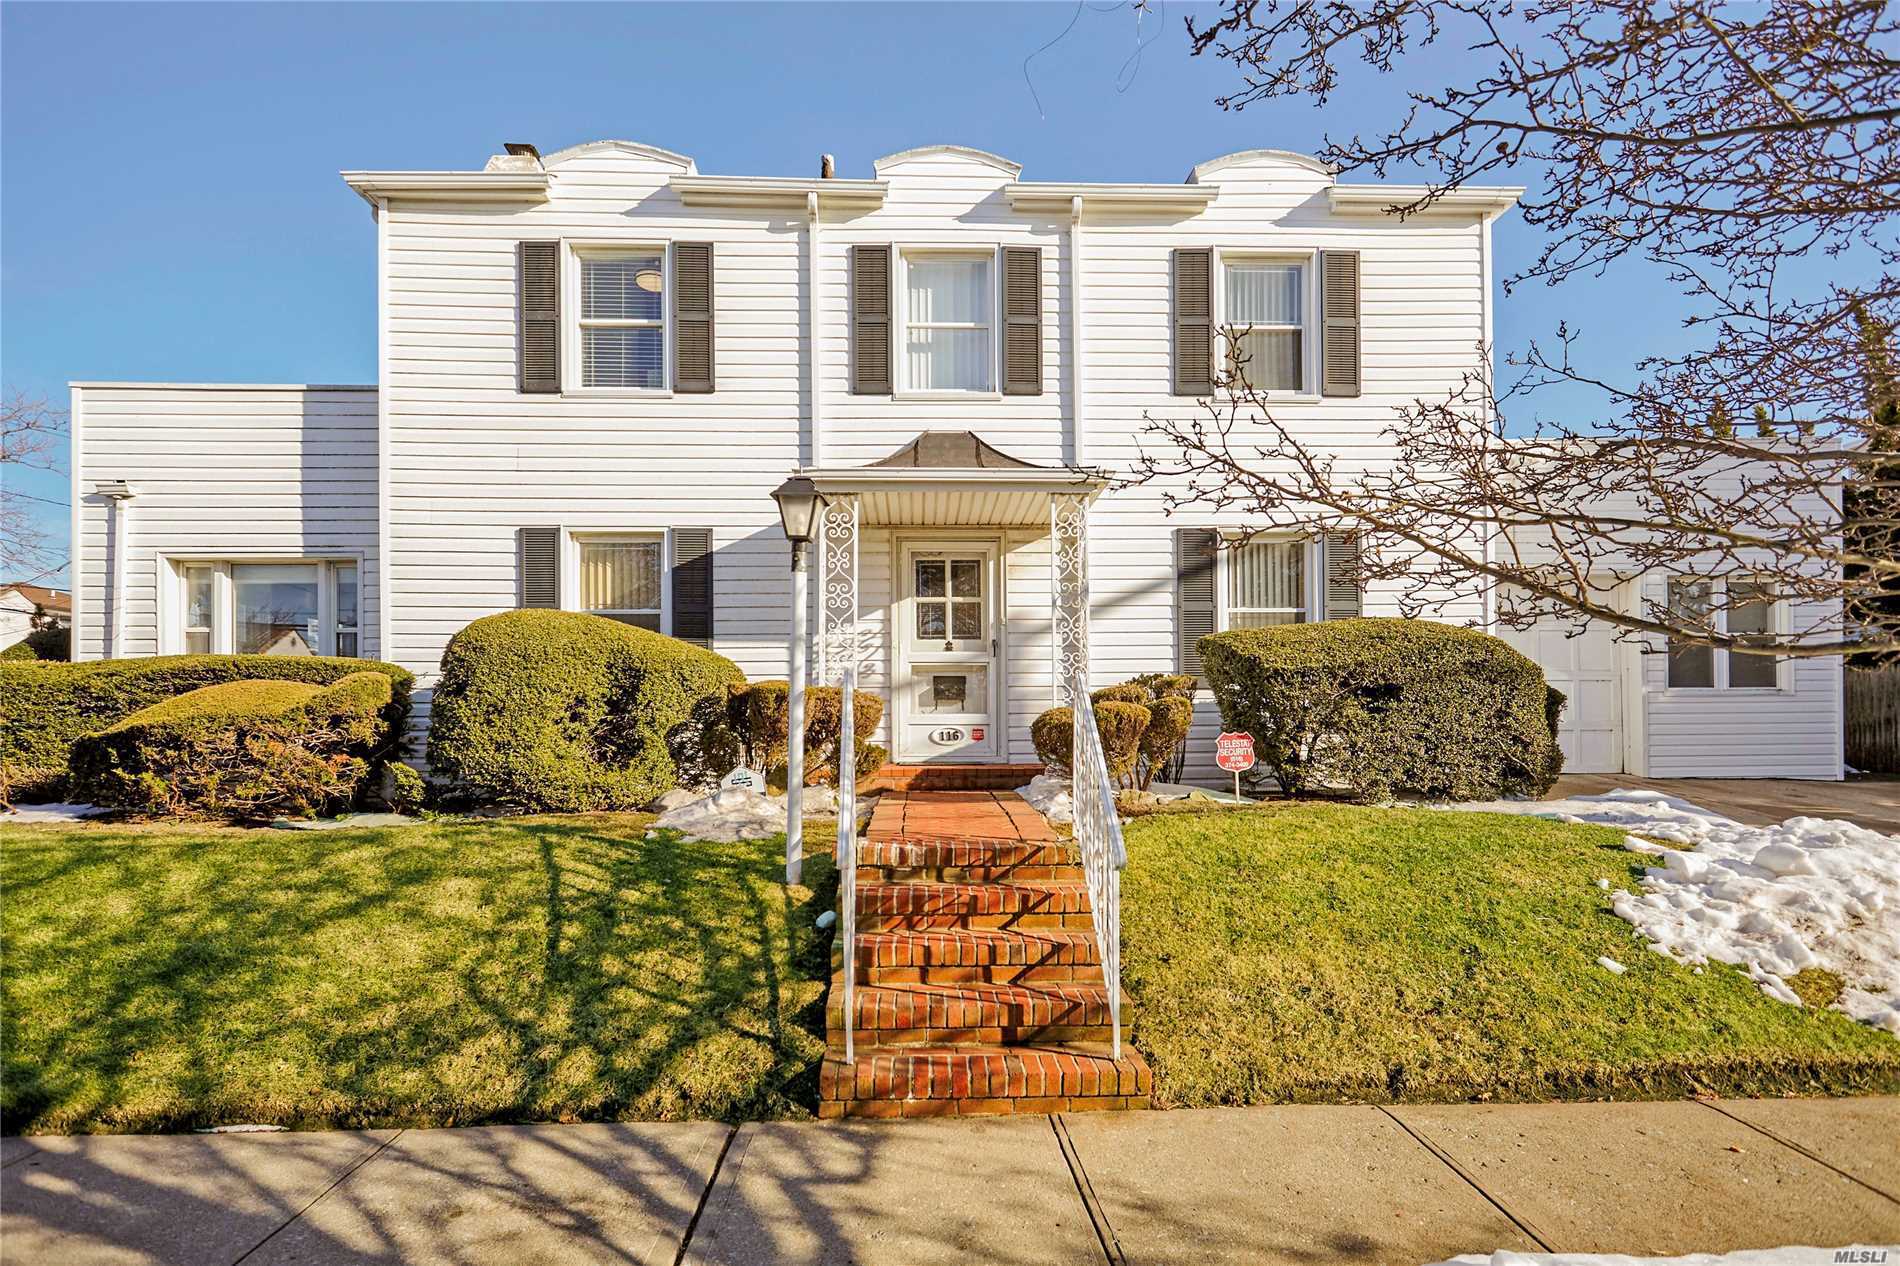 Location , Location, Location !! Exclusive Private Beach Community. Spacious C/H Colonial Located On Corner Of Prestigious Bay Blvd. 1st Fl-Sunlit Lr W Wood Burning Fpl, Sitting Room Sunroom, Formal D/R, Eat-In Kitchen. Office/Bdrm W Full Bath And Closet. 2nd Fl-Master W Bath, Plus 2 Additional Bdrms And 1 Full Bath. Make It Your Own!!